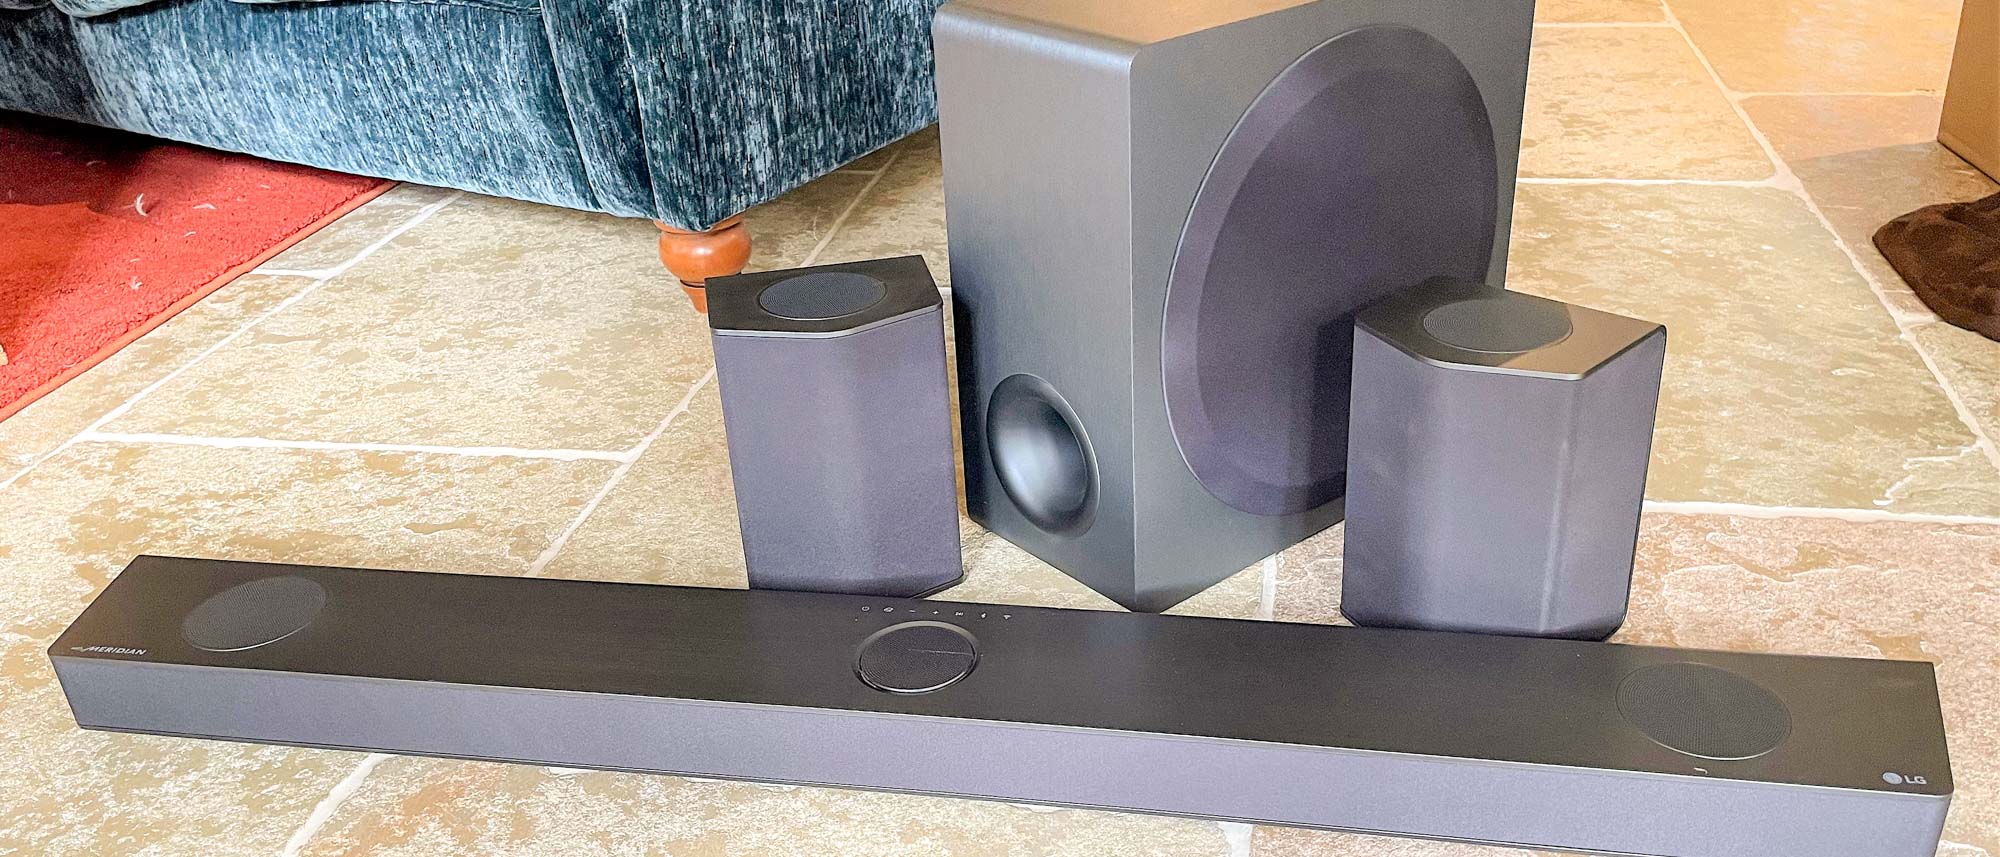 LG SC9S Review: Decent Sound, But Can't Compete With Sonos